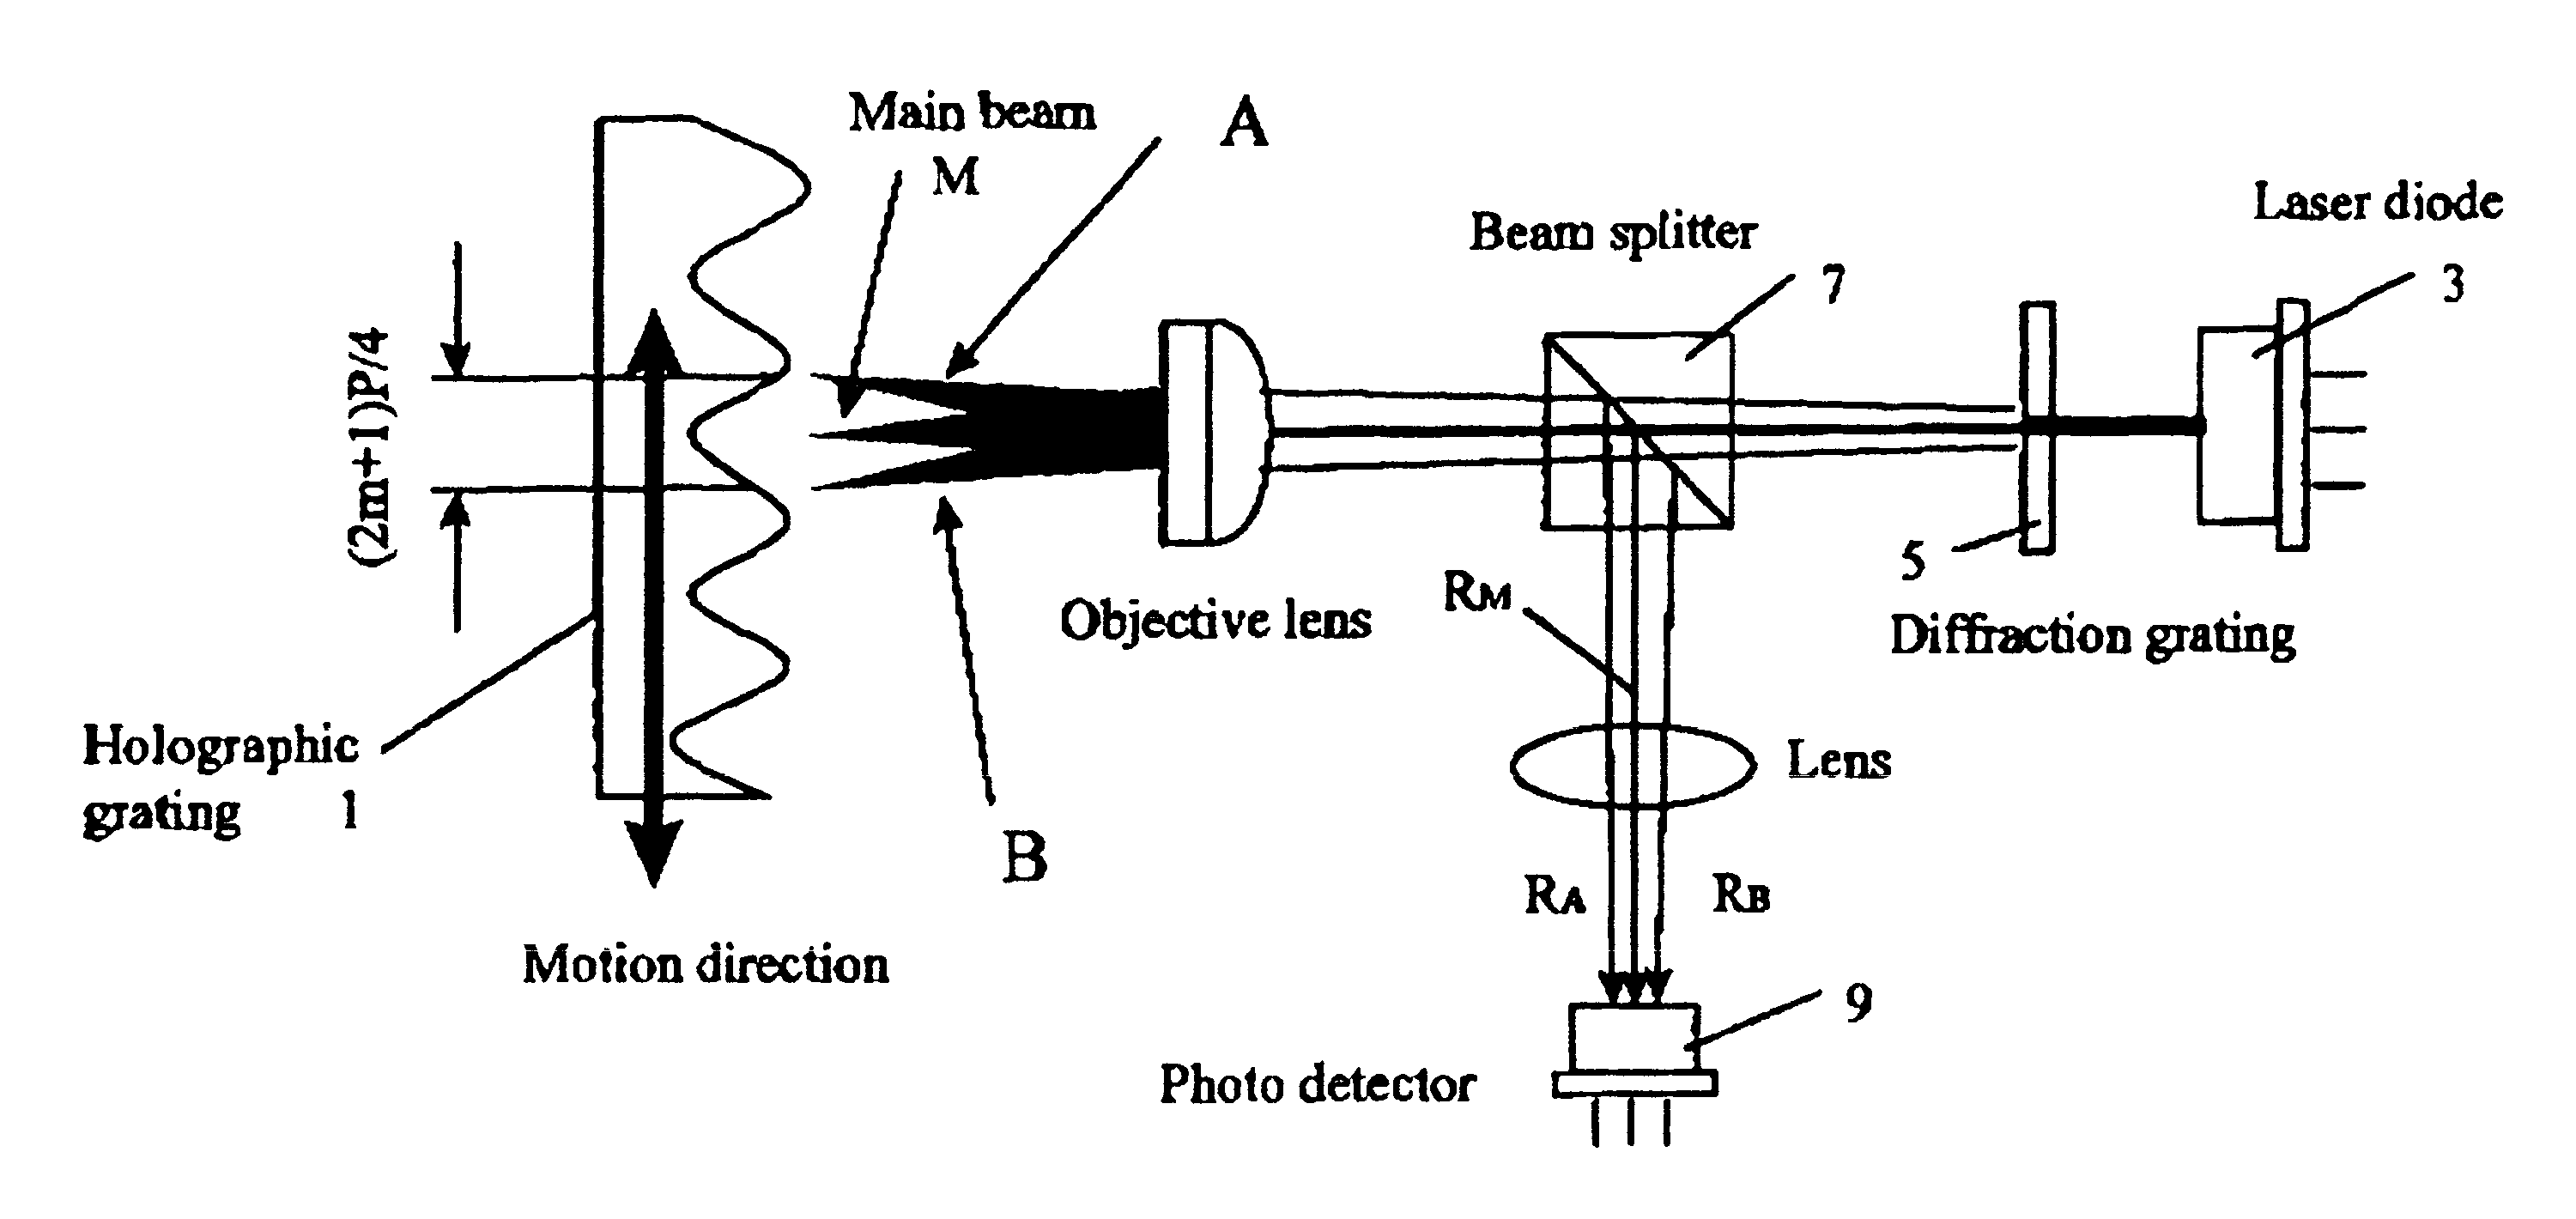 Method of and apparatus for real-time continual nanometer scale position measurement by beam probing as by laser beams and the like of atomic and other undulating surfaces such as gratings or the like relatively moving with respect to the probing beams